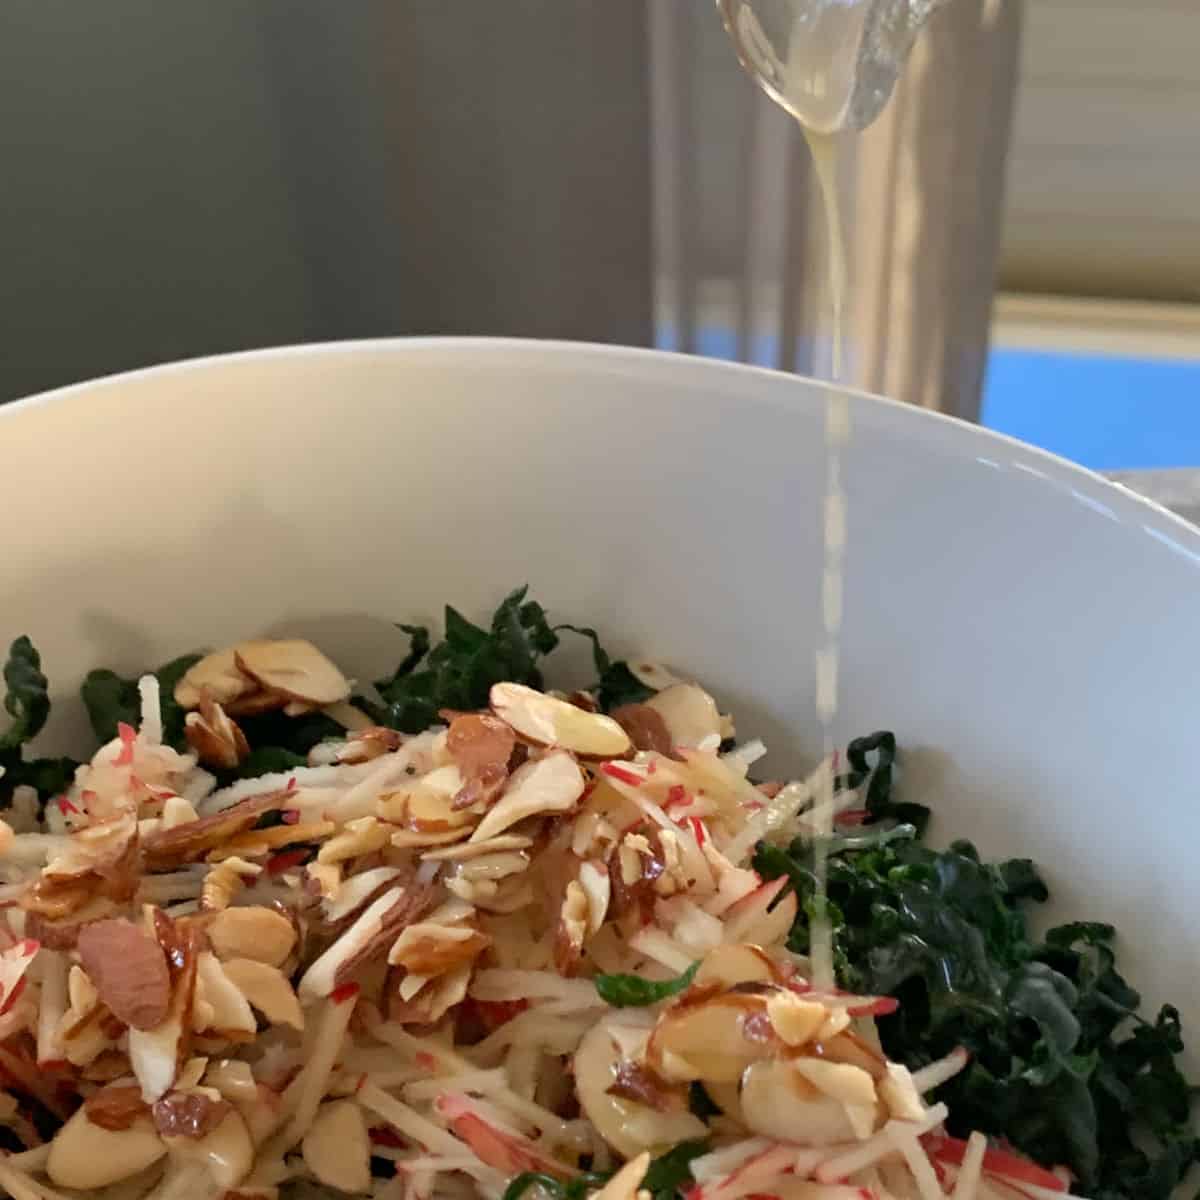 Dressing is being poured over the kale, shredded apples, and almond praline. 